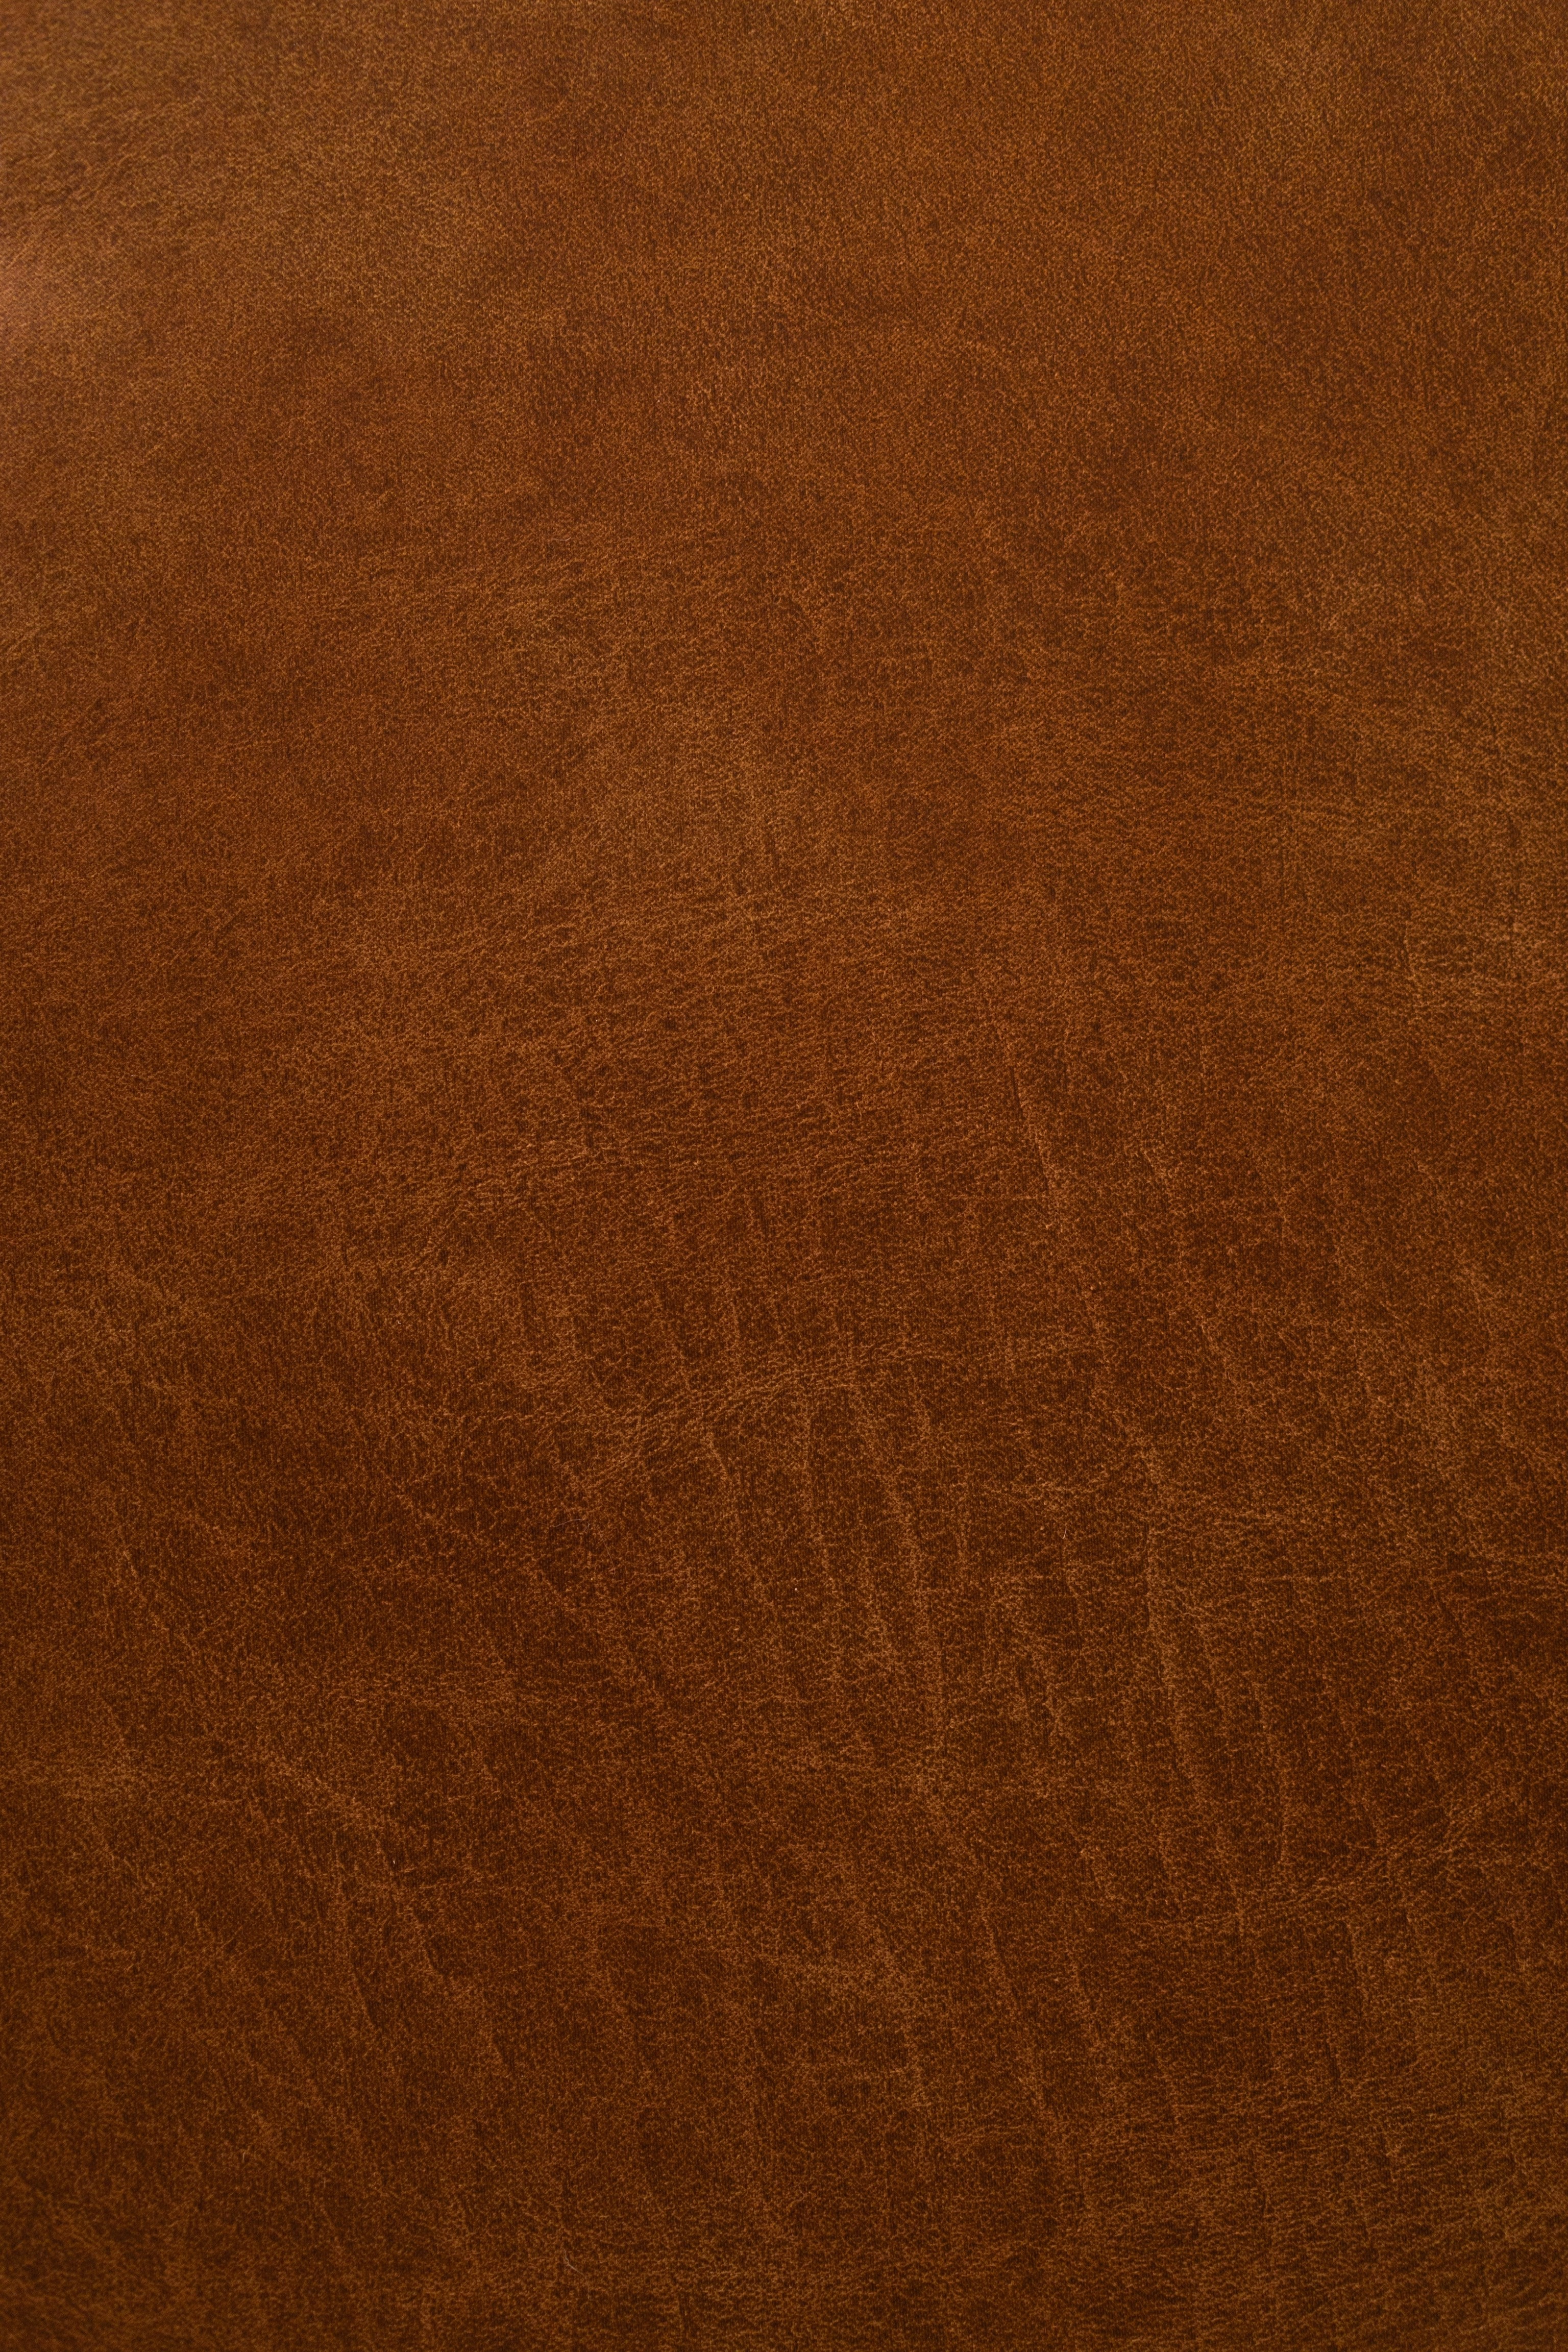 skin, brown, leather, textures, surface, texture